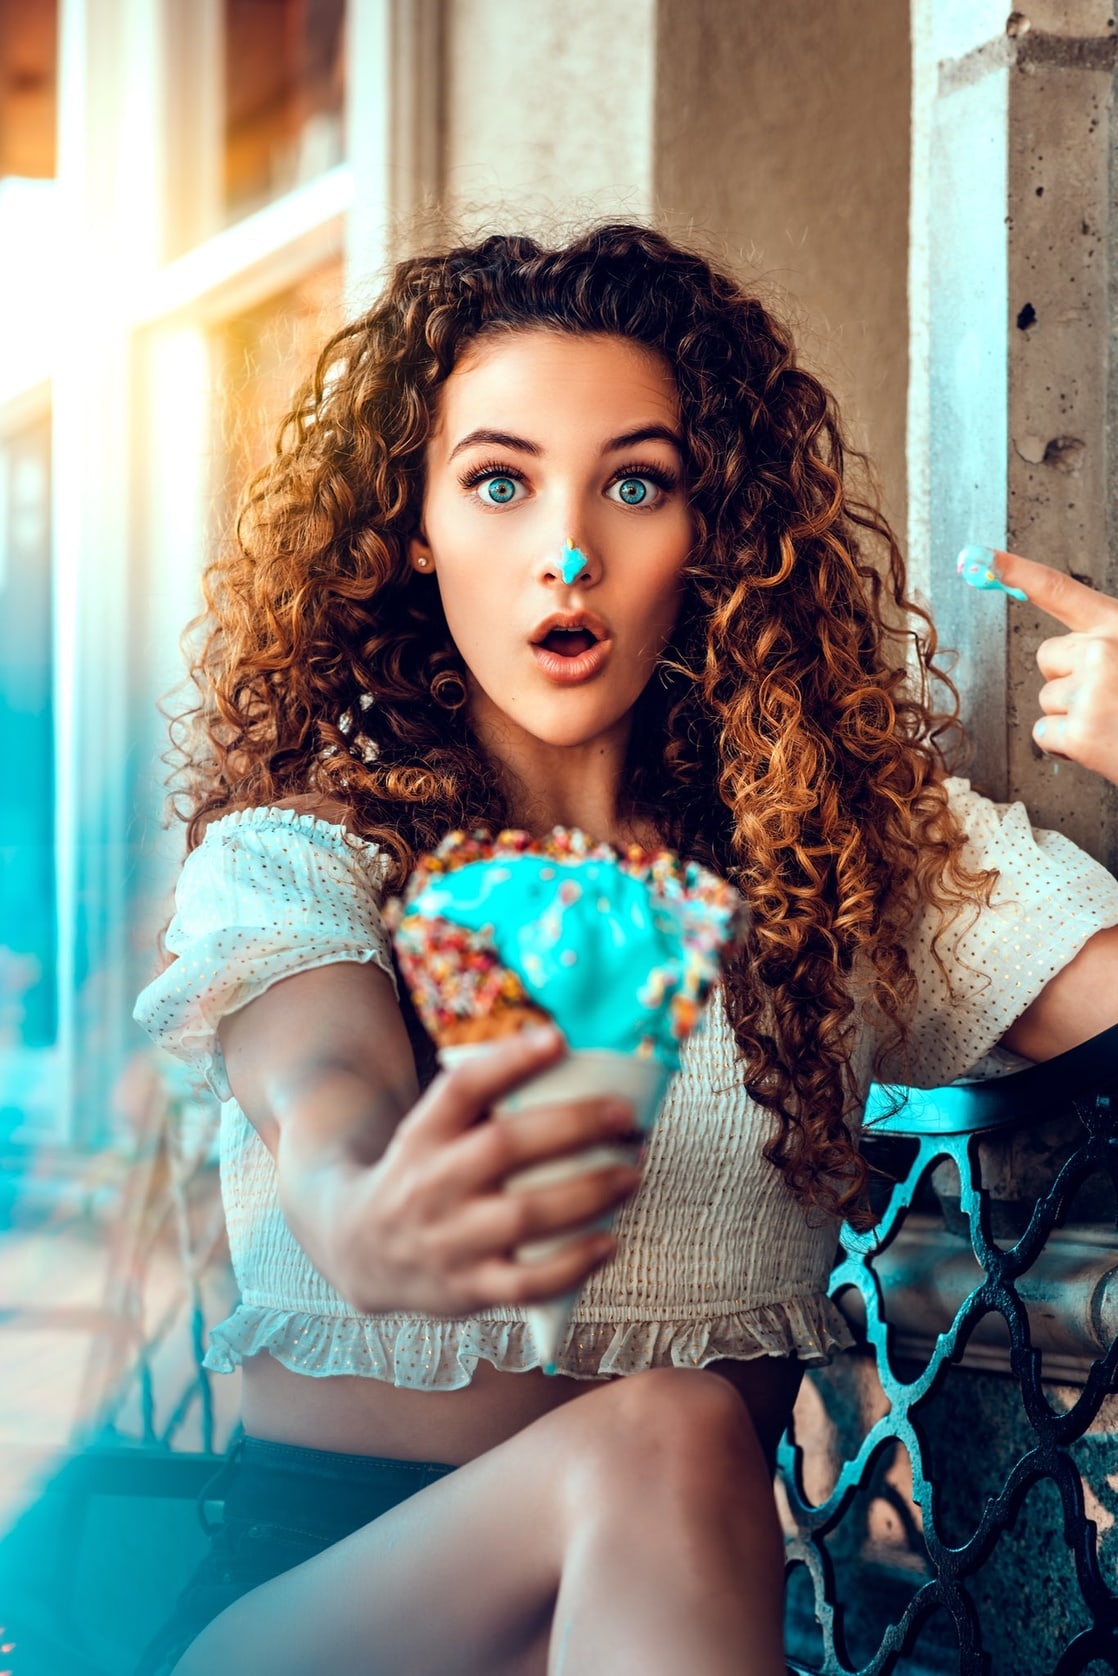 People 1118x1676 women model redhead long hair Sofie Dossi curly hair face portrait display blue eyes open mouth ice cream depth of field white tops legs frontal view